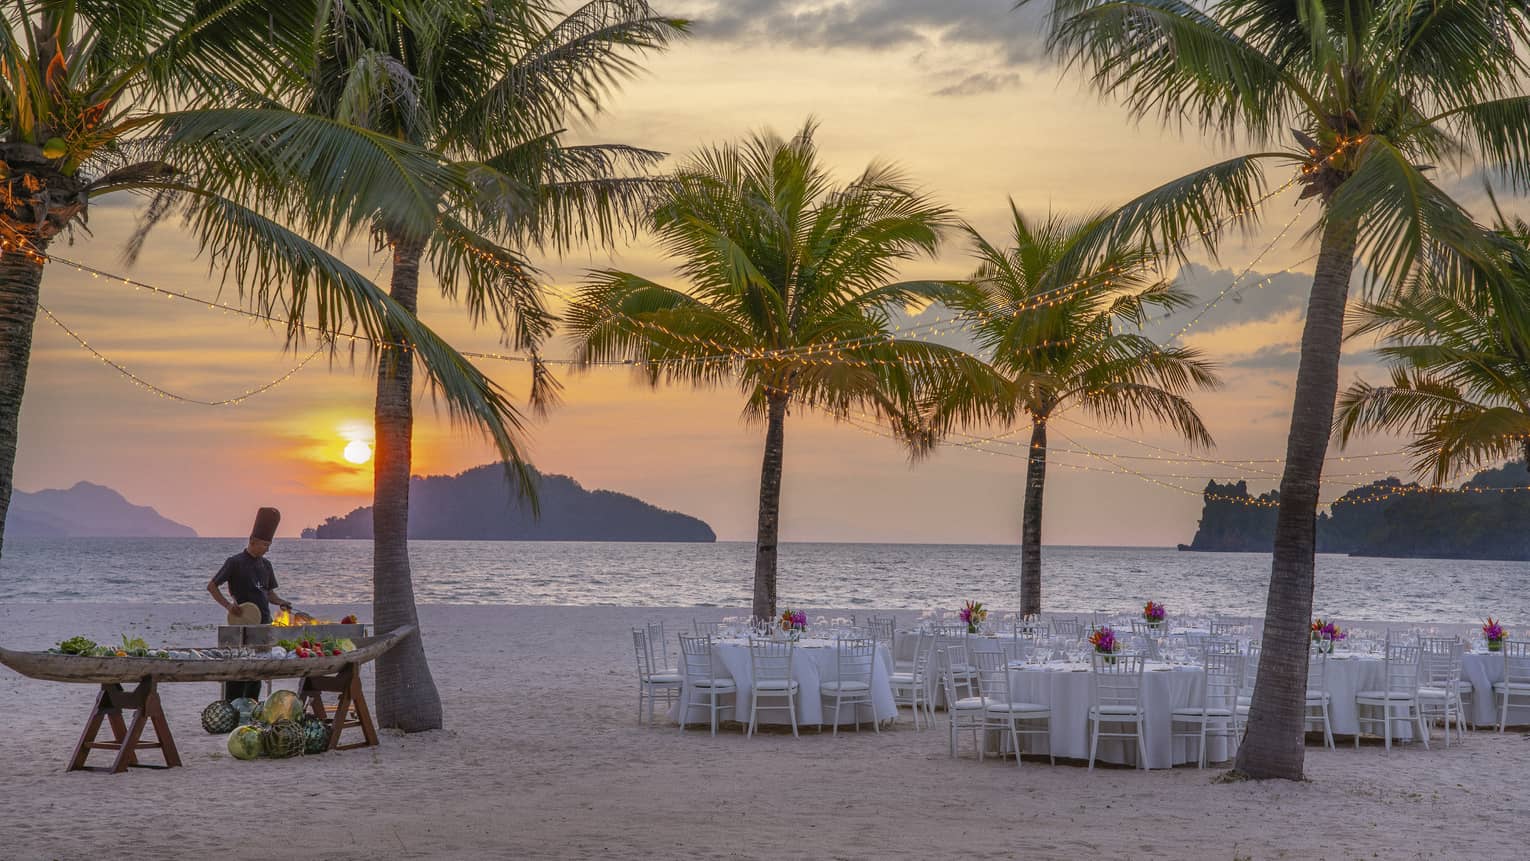 Tables set for dinner on the beach under a canopy of palm trees, a chef cooking over an open flame against the setting sun.